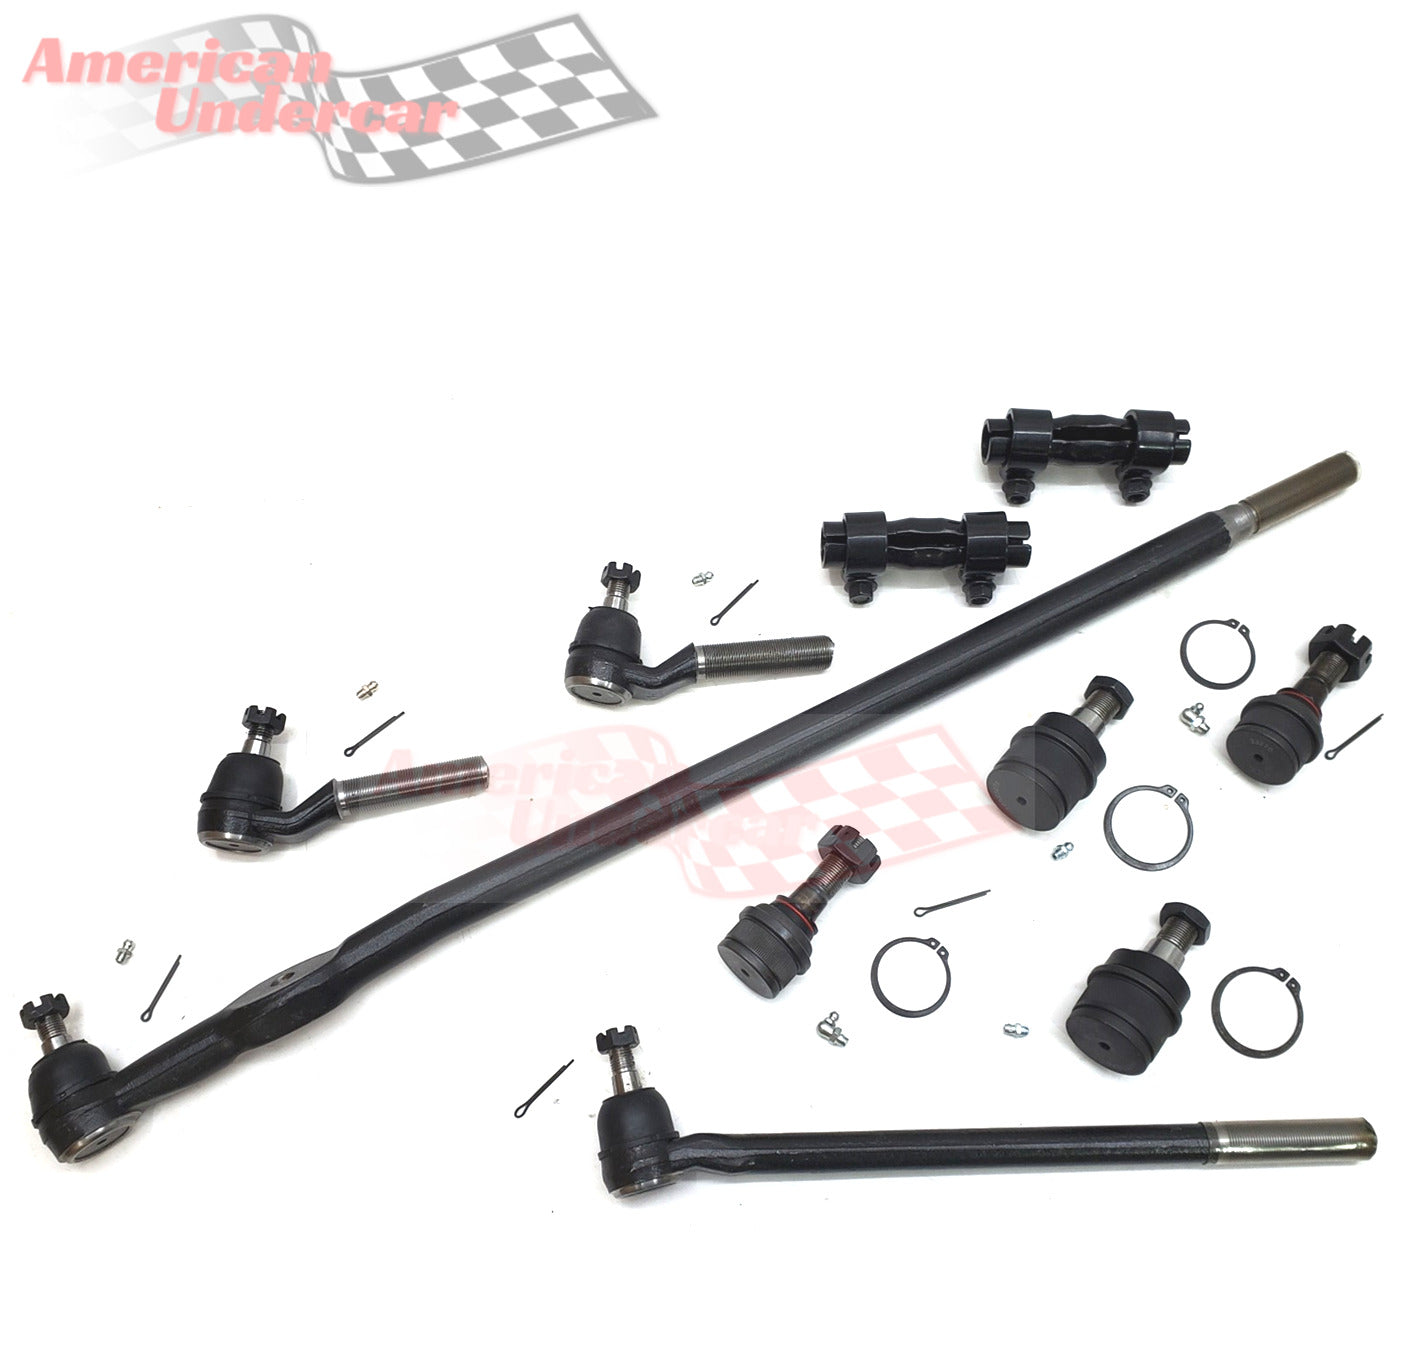 HD Ball Joint Tie Rod Drag Link Steering Kit for 1985-1994 Ford F250 4x4 4600lb Axle